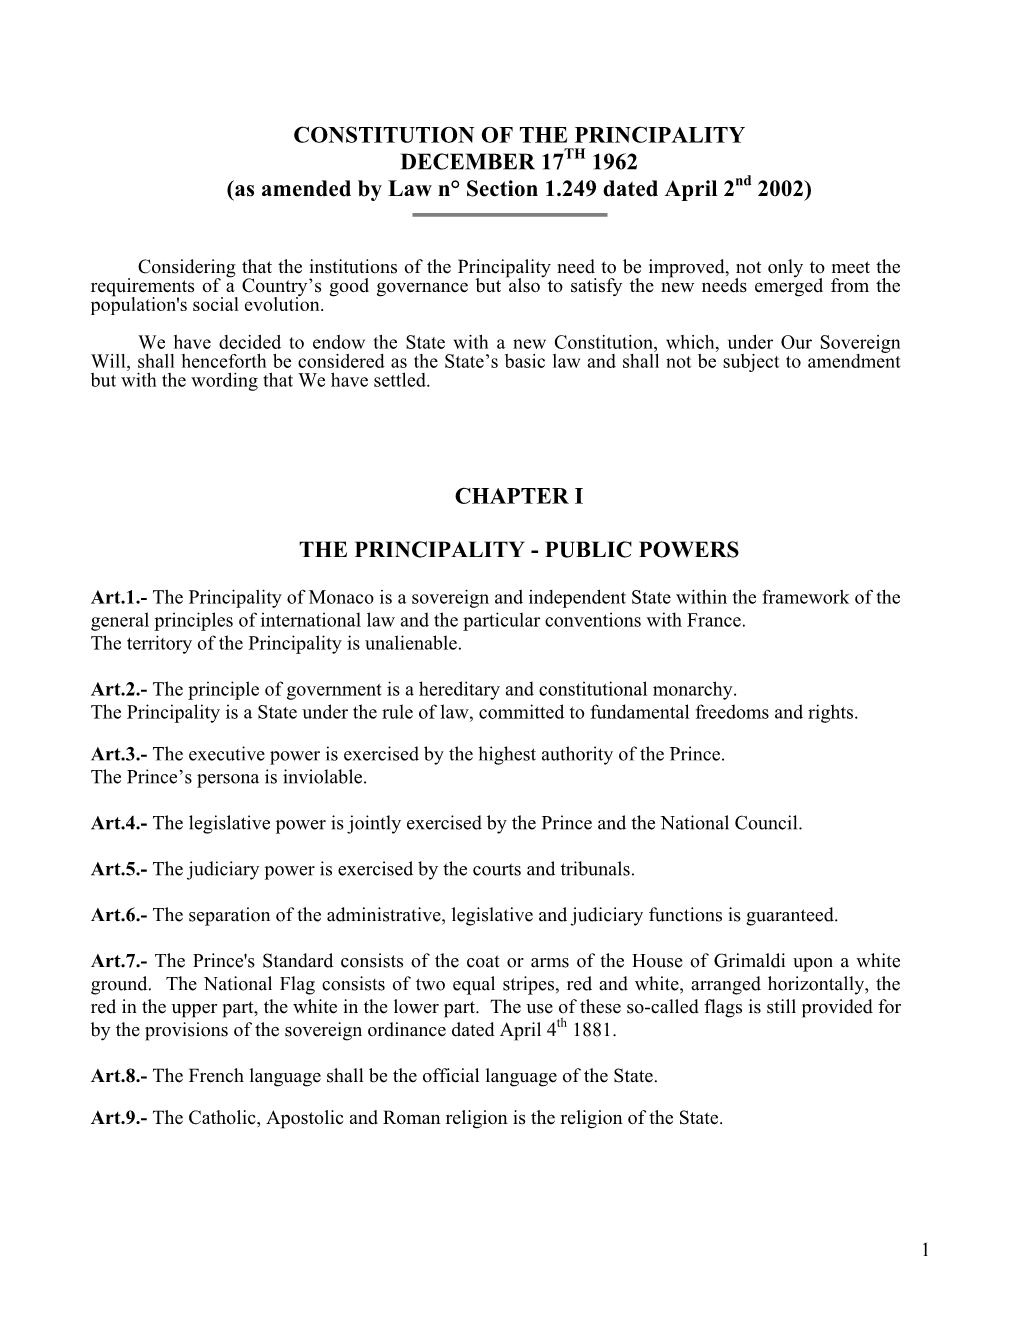 Constitution of the Principality of December 17, 1962 (As Amended